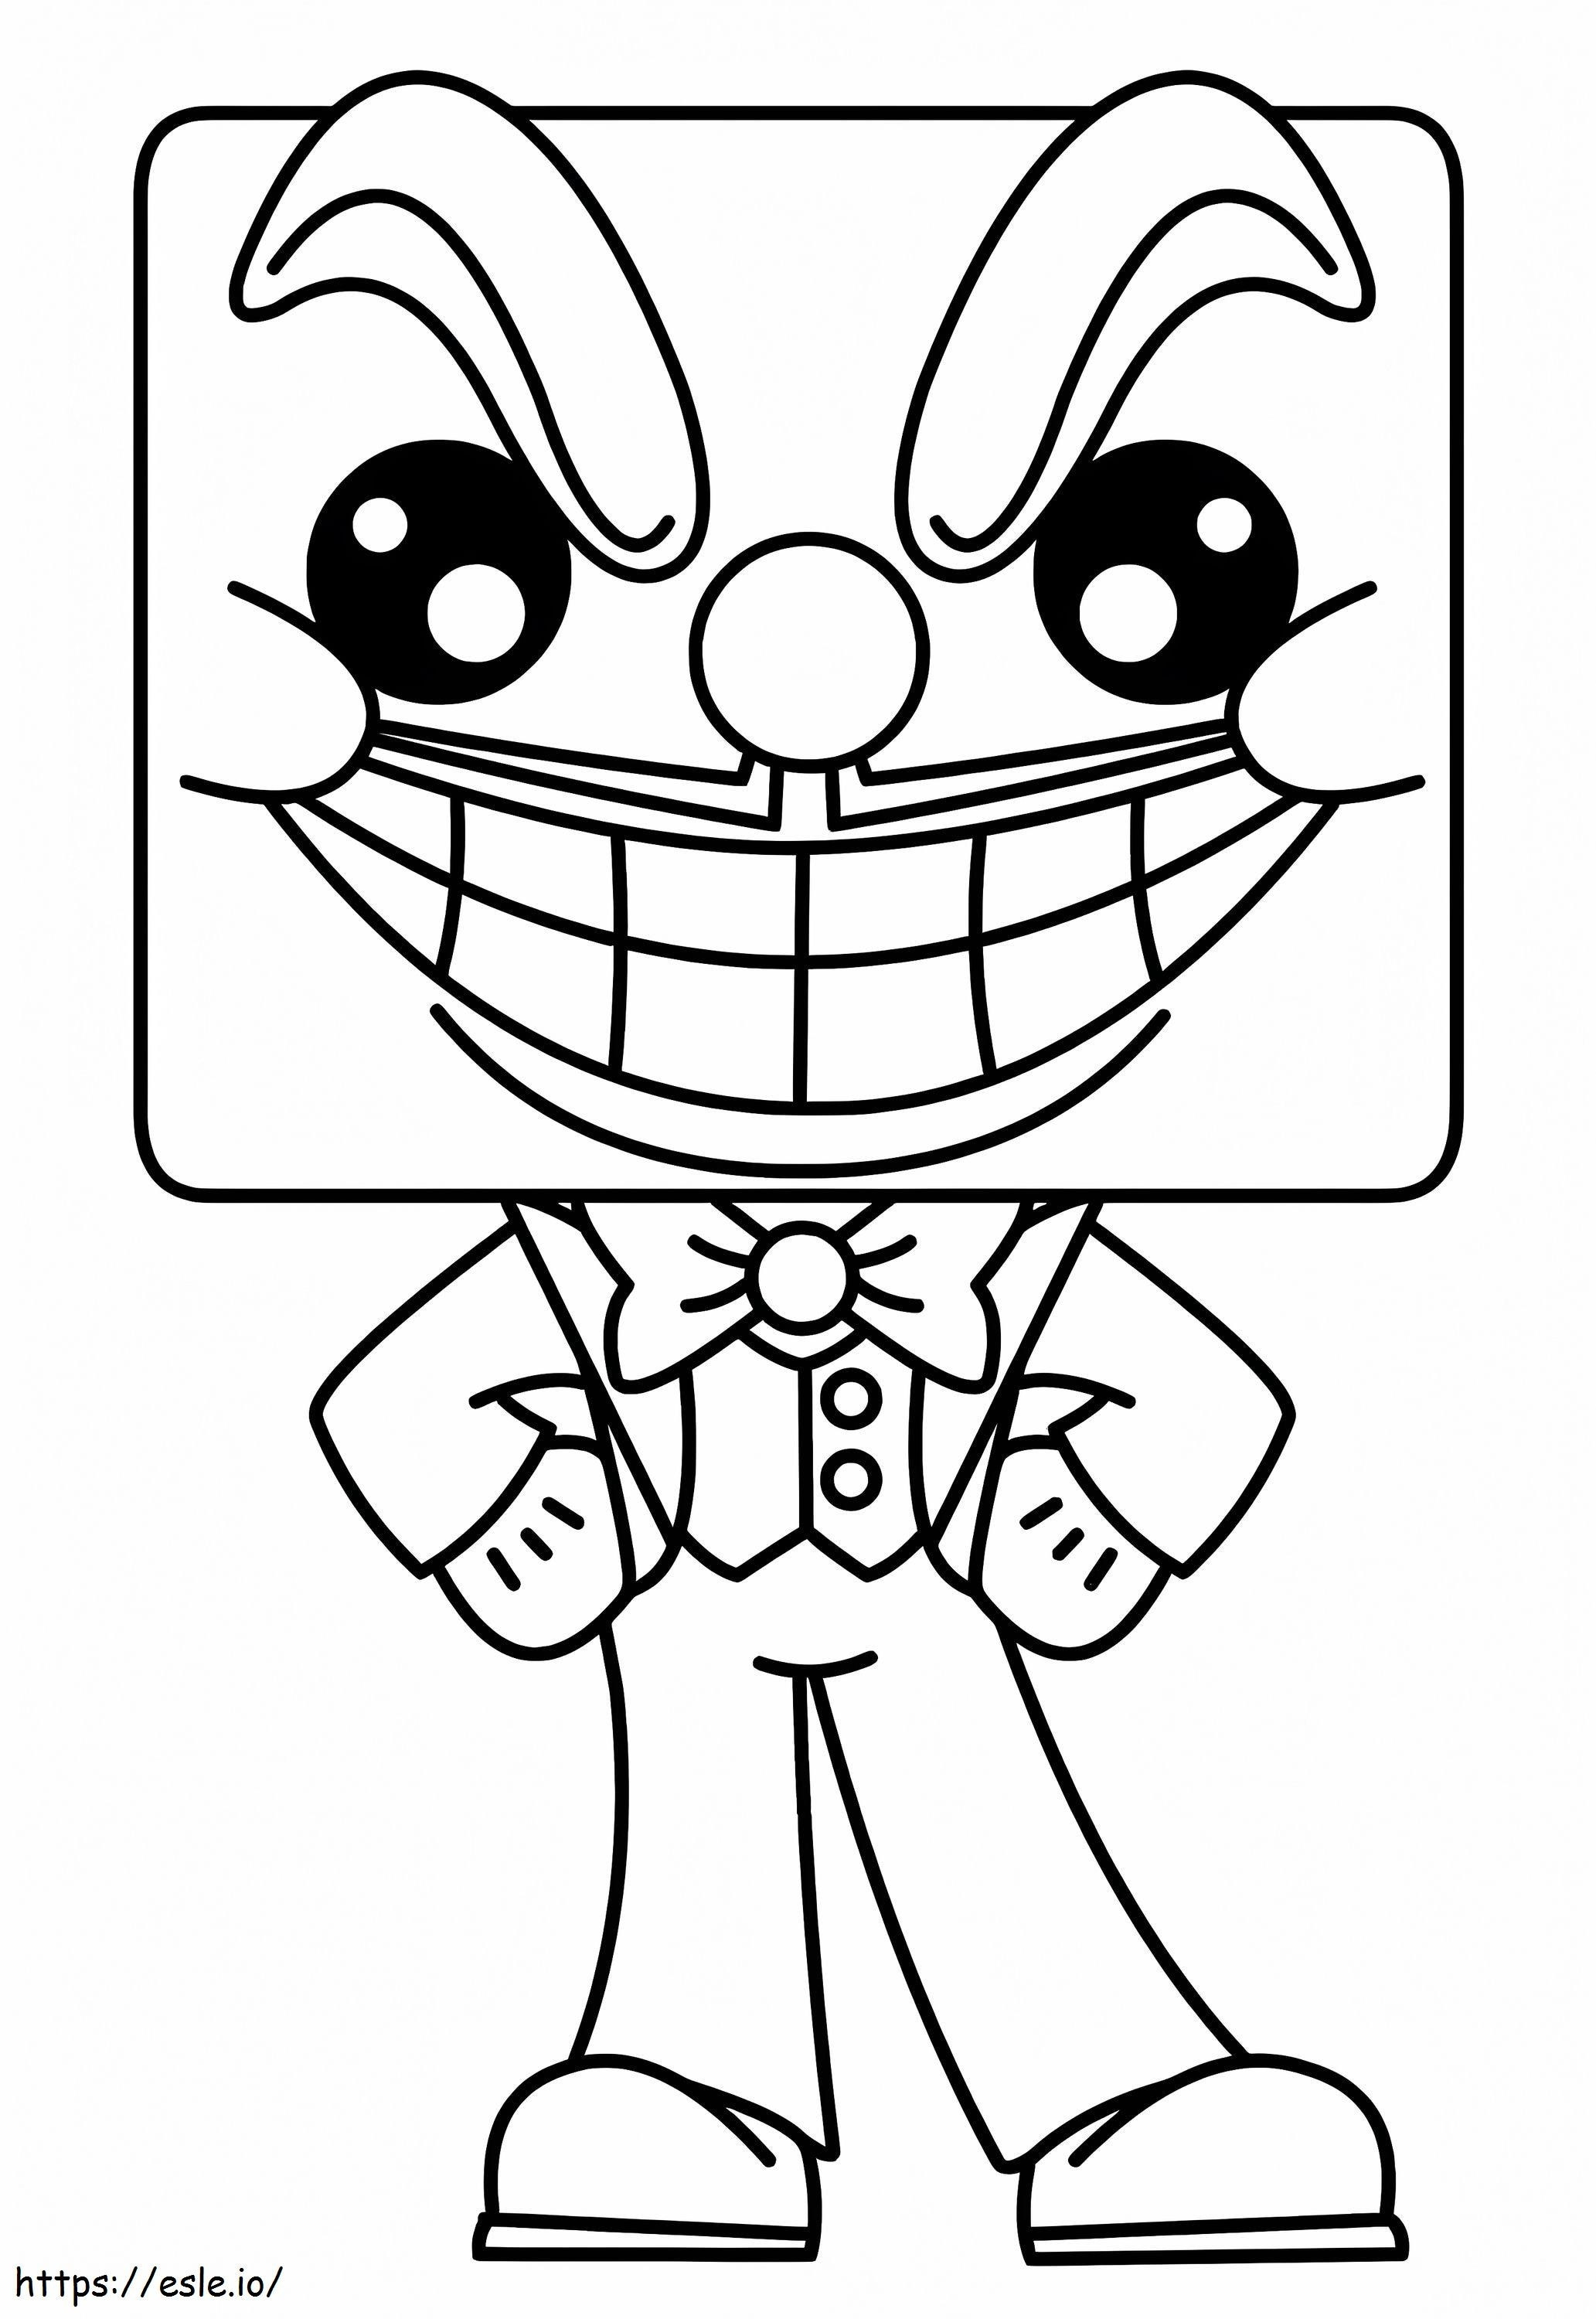 Little King Dice coloring page